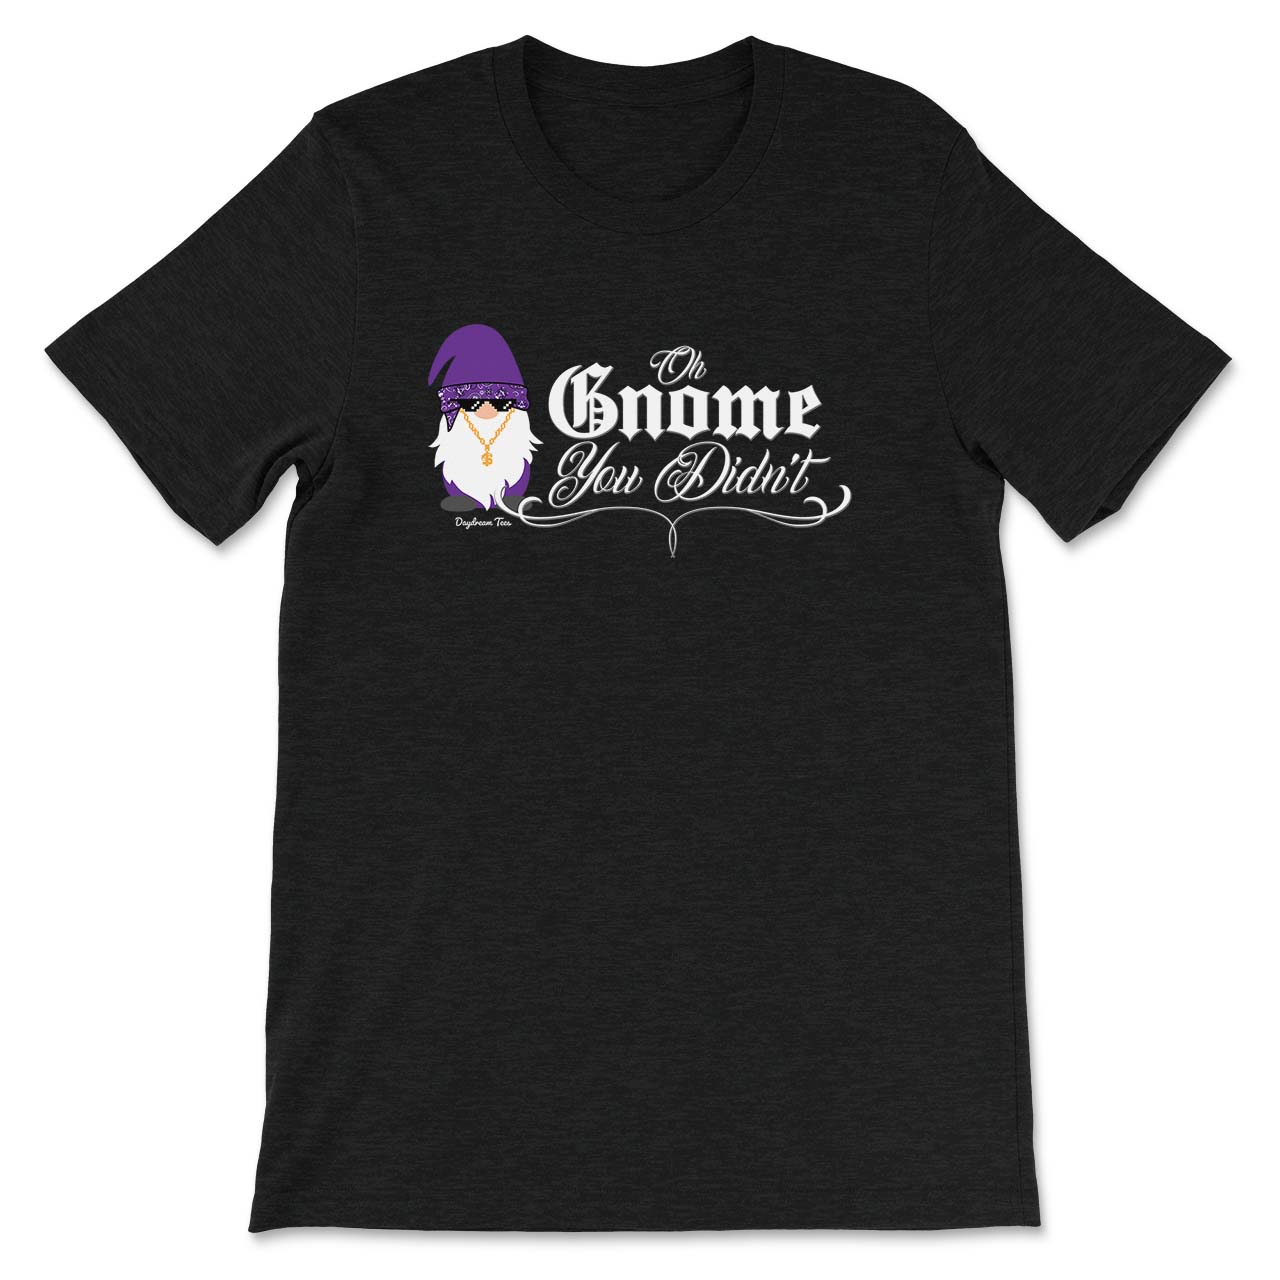 Daydream Tees Oh Gnome You Didn't